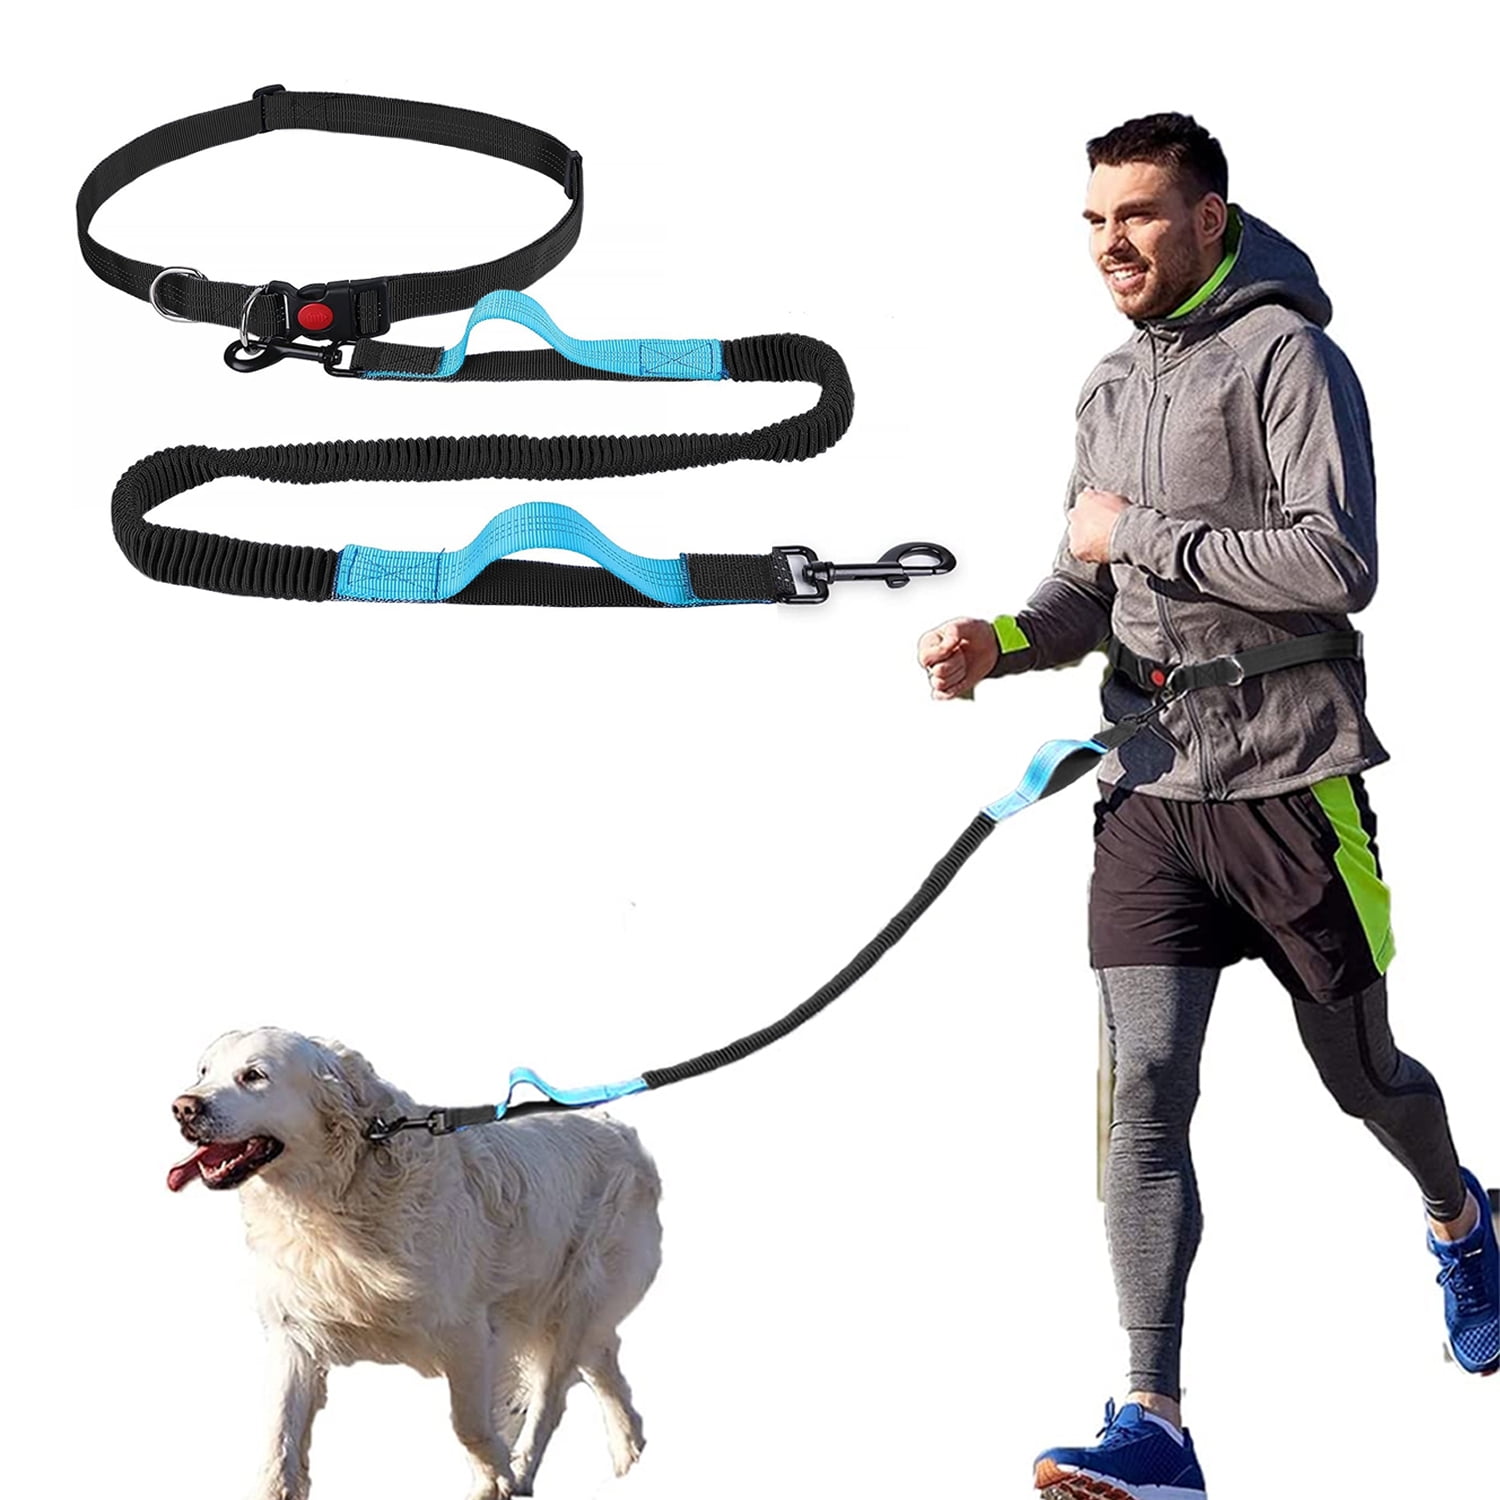 Buy Rope Leash and Harness Set Large - Imagine Care Limited